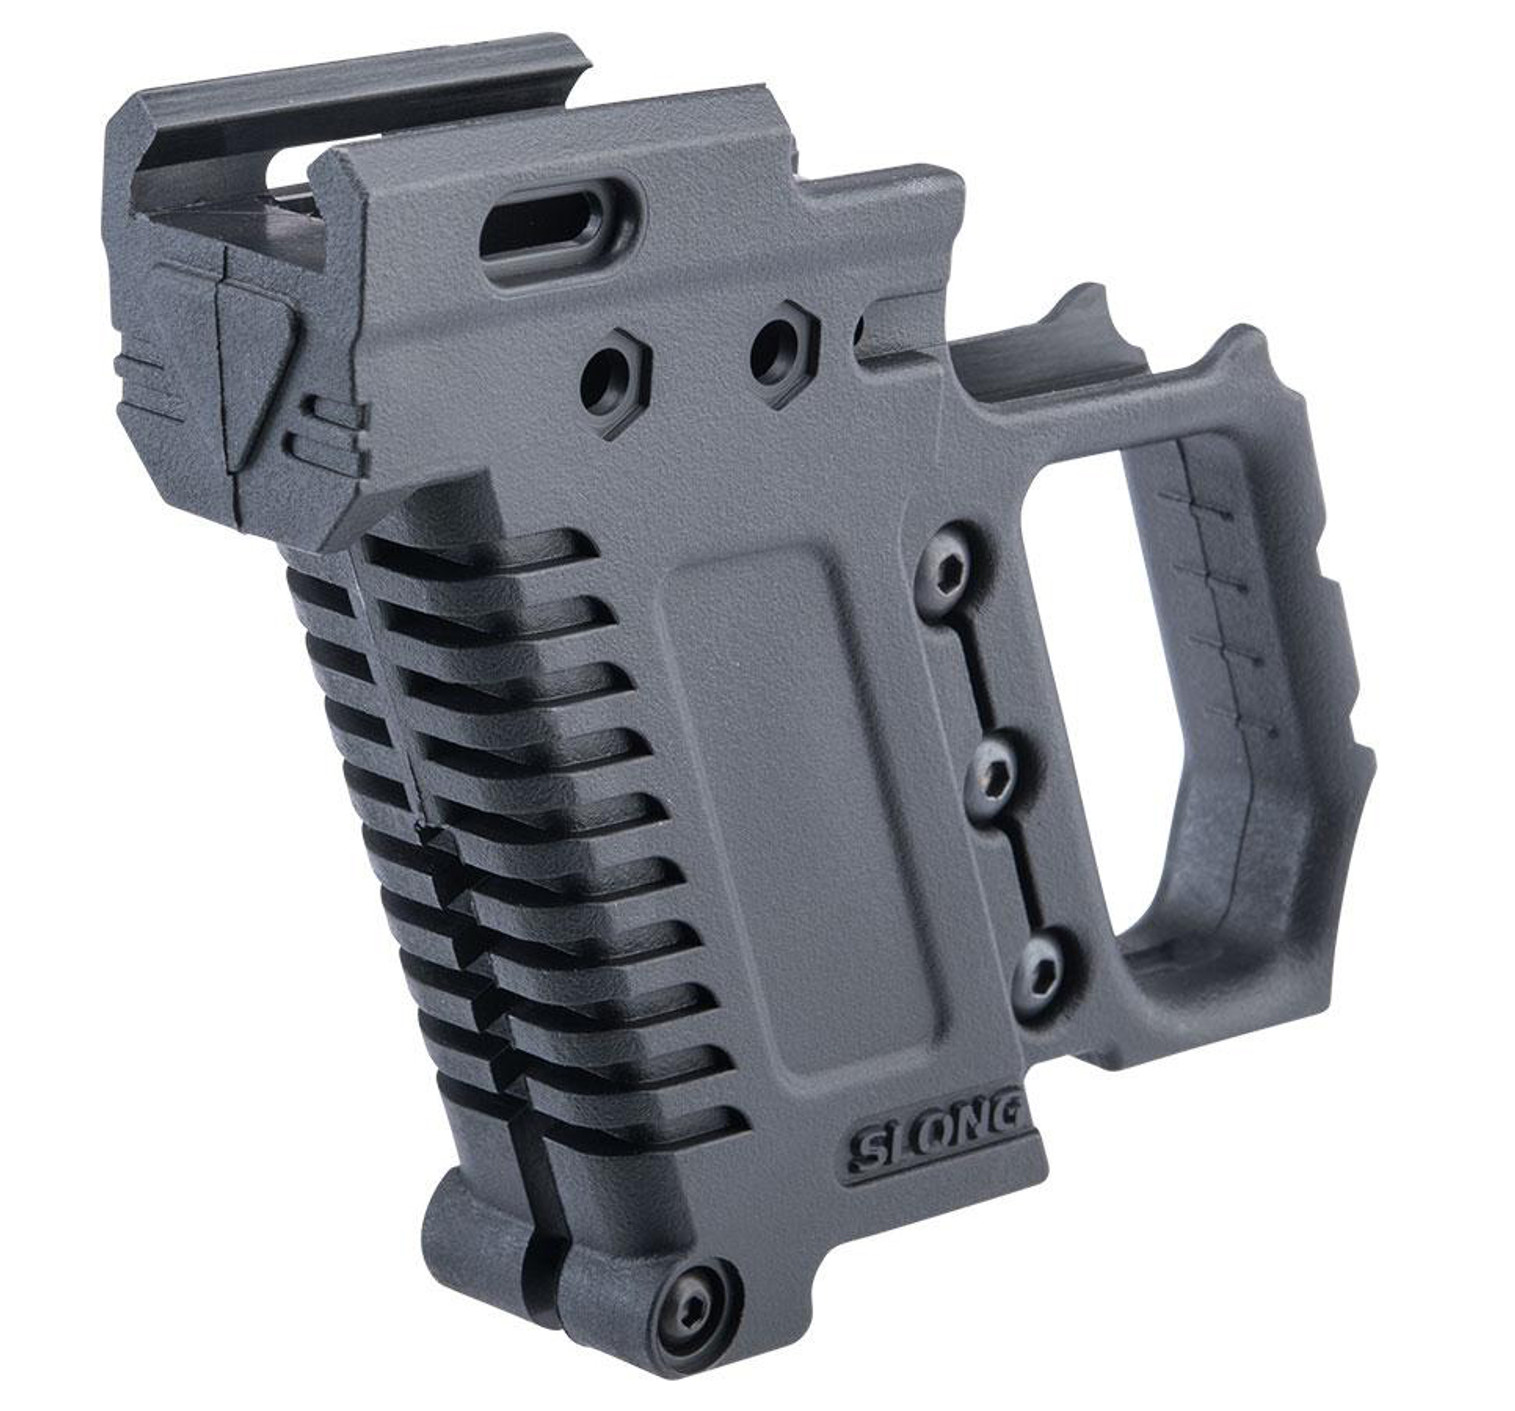 Slong Airsoft 3D Printed Front Grip with Magazine Caddy for Elite Force / UMAREX GLOCK Airsoft Gas Blowback Pistols